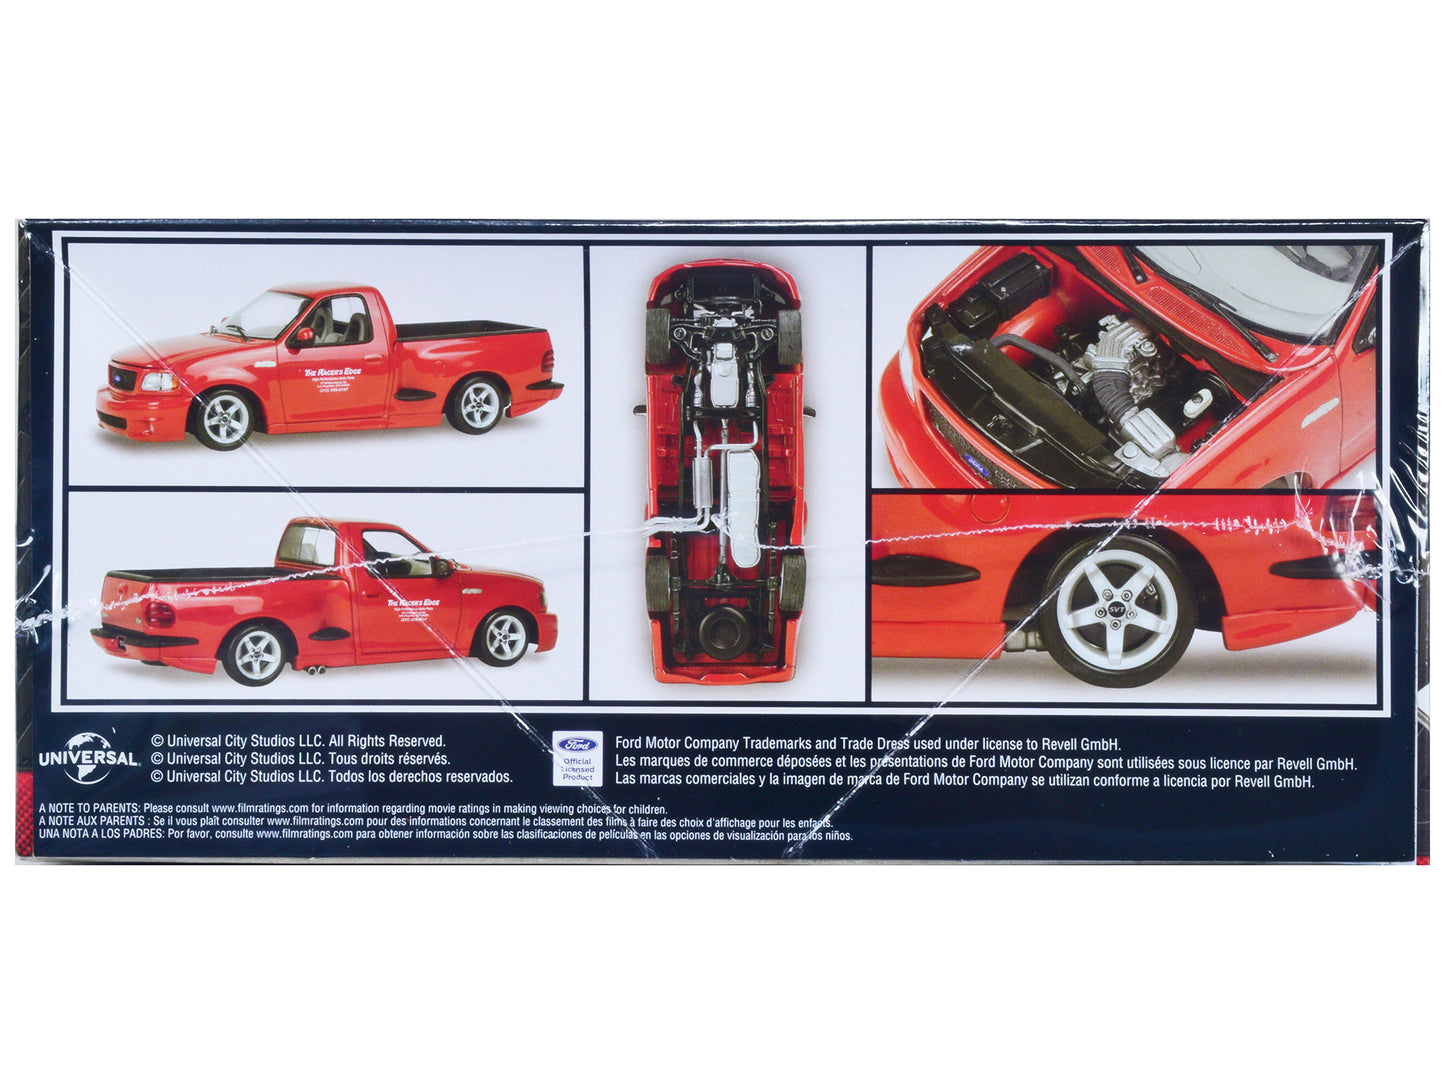 Level 4 Model Kit Brian’s Ford F-150 SVT Lightning Pickup Truck "Fast and Furious" 1/25 Scale Model by Revell